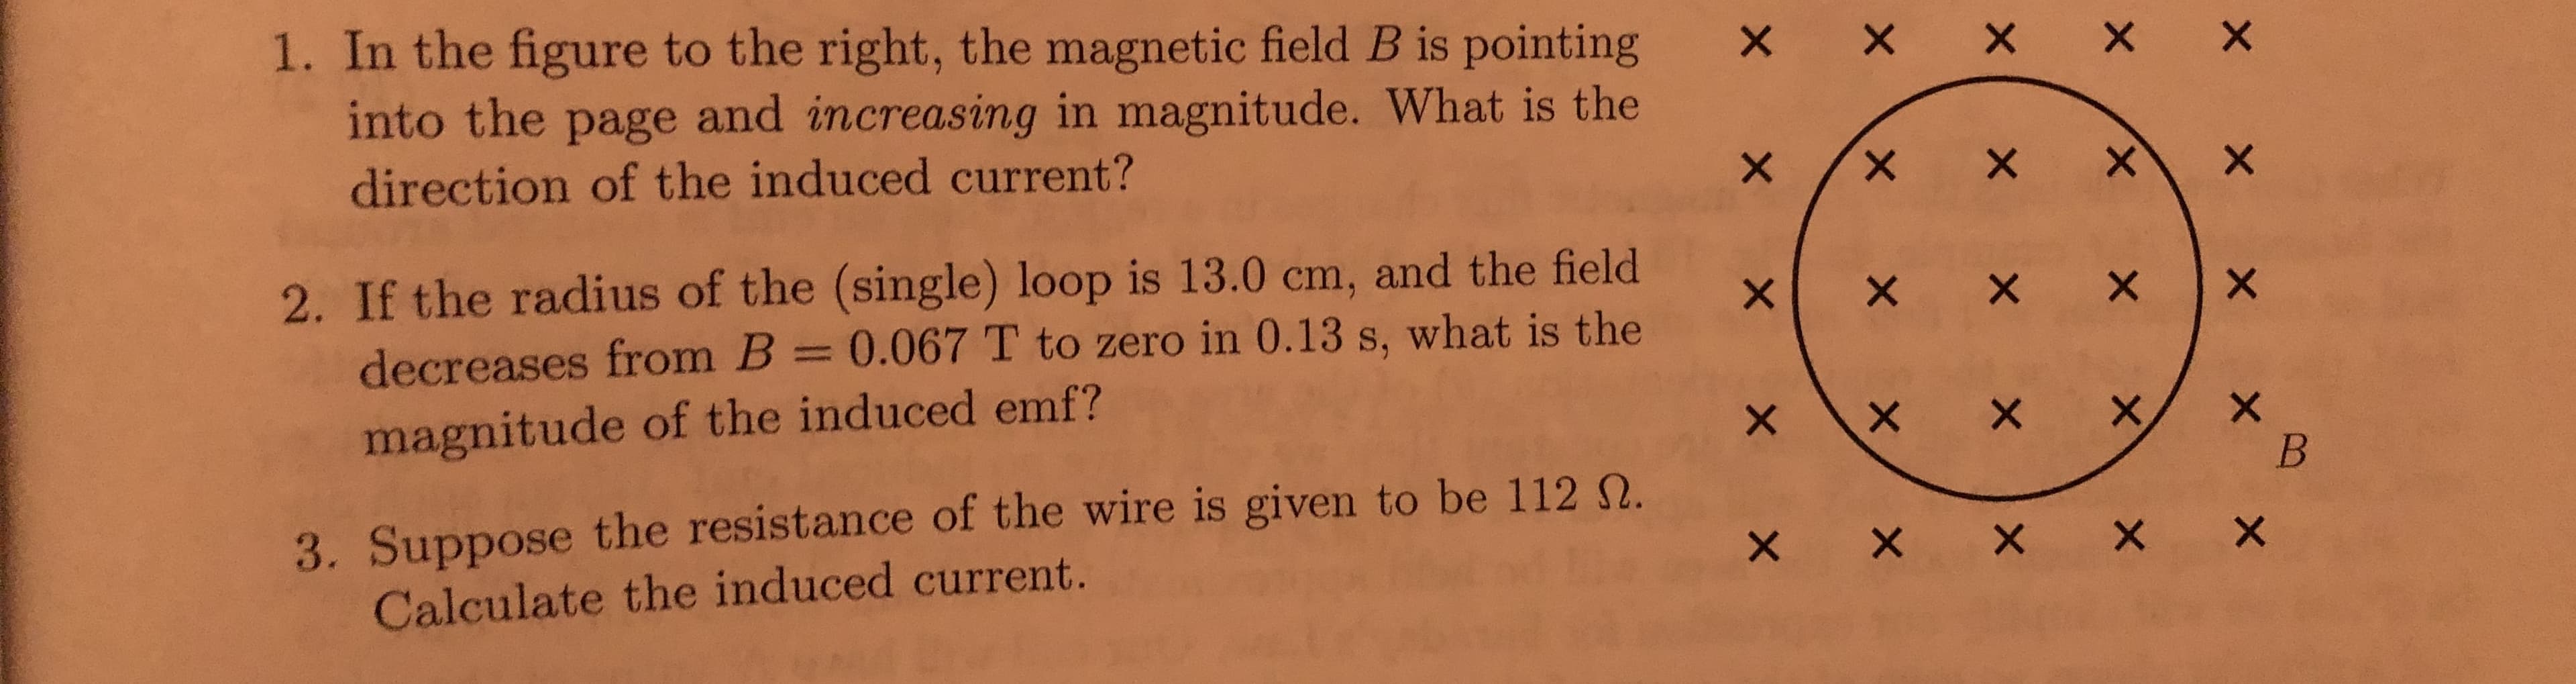 X X X X X
1. In the figure to the right, the magnetic field B is pointing
into the page and increasing in magnitude. What is the
direction of the induced current?
2. If the radius of the (single) loop is 13.0 cm, and the field
decreases from B = 0.067 T to zero in 0.13 s, what is the
%3D
メ
magnitude of the induced emf?
3. Suppose the resistance of the wire is given to be 112 N.
Calculate the induced current.
X X X X X
X,
